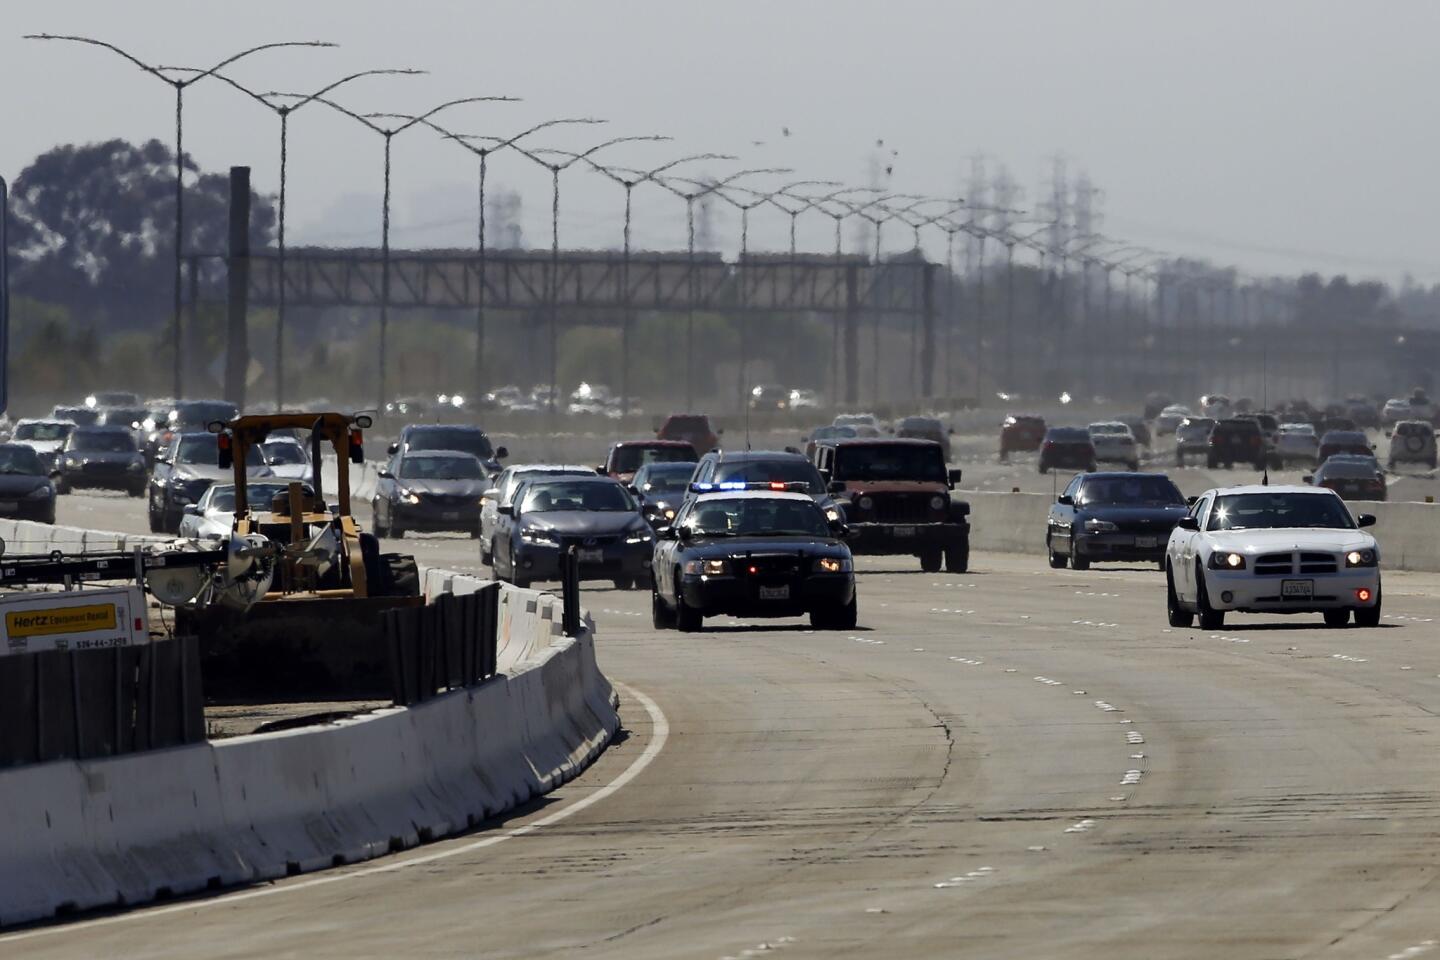 Police cars lead the way as the 405 Freeway in Orange County reopens.